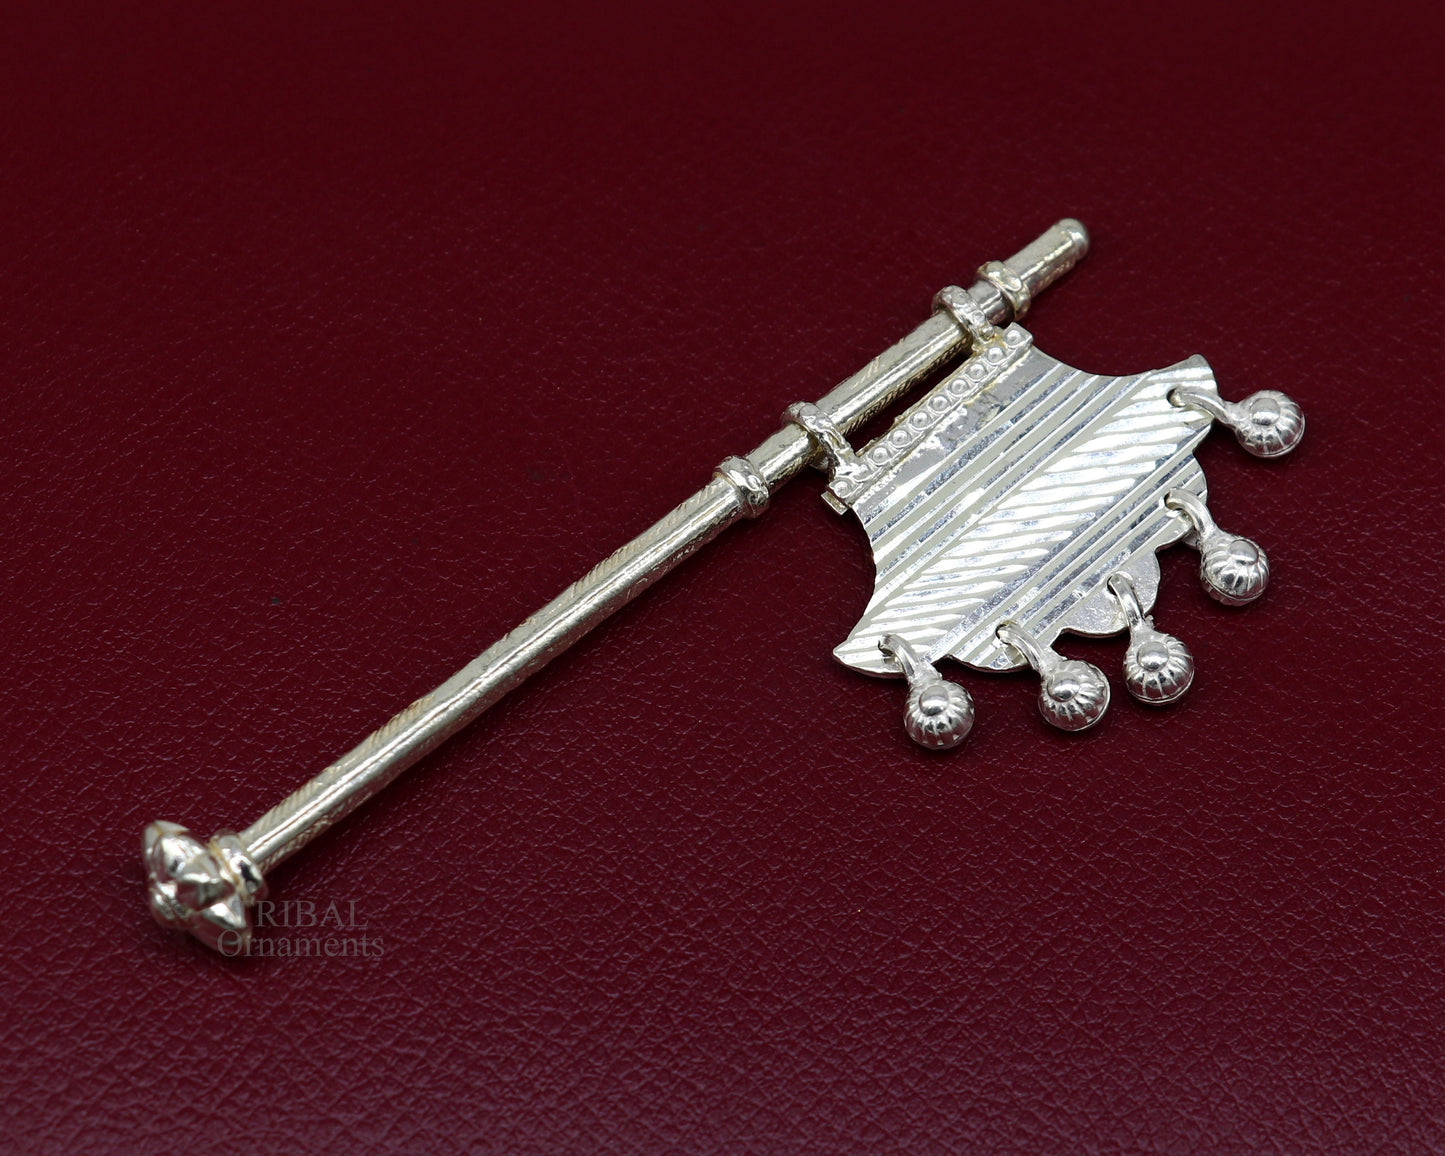 925 sterling silver pankhi, small fan or pankhi for god puja, best gifting to laddu gopala krishna, silver hand fan puja article su689 - TRIBAL ORNAMENTS